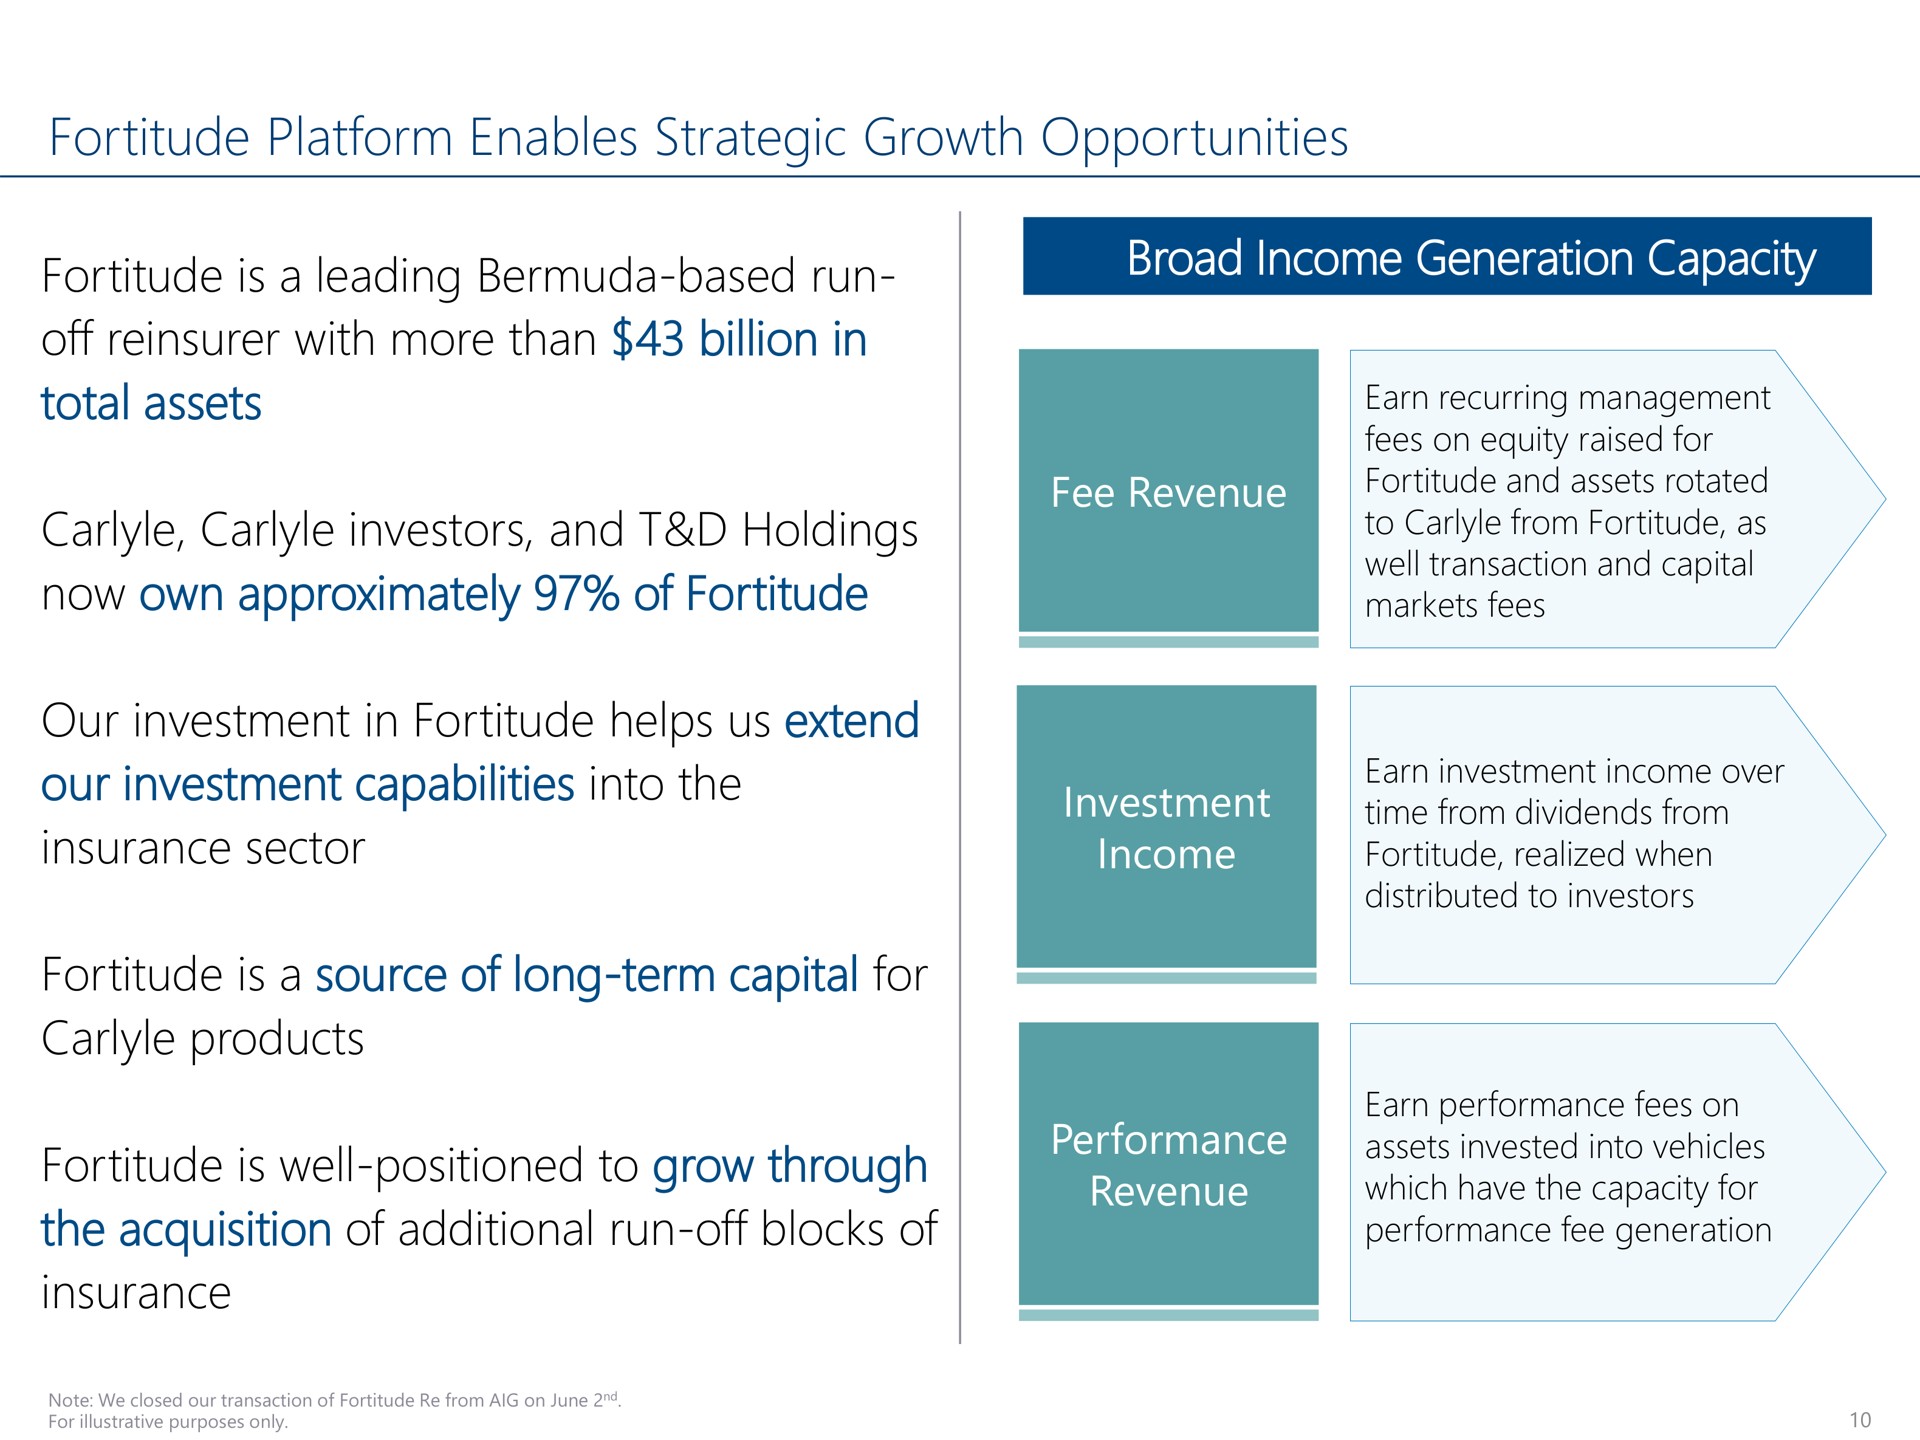 fortitude platform enables strategic growth opportunities fortitude is a leading based run off reinsurer with more than billion in total assets investors and holdings now own approximately of fortitude our investment in fortitude helps us extend our investment capabilities into the insurance sector fortitude is a source of long term capital for products fortitude is well positioned to grow through the acquisition of additional run off blocks of insurance broad income generation capacity fee revenue investment income performance revenue dice dividends | Carlyle